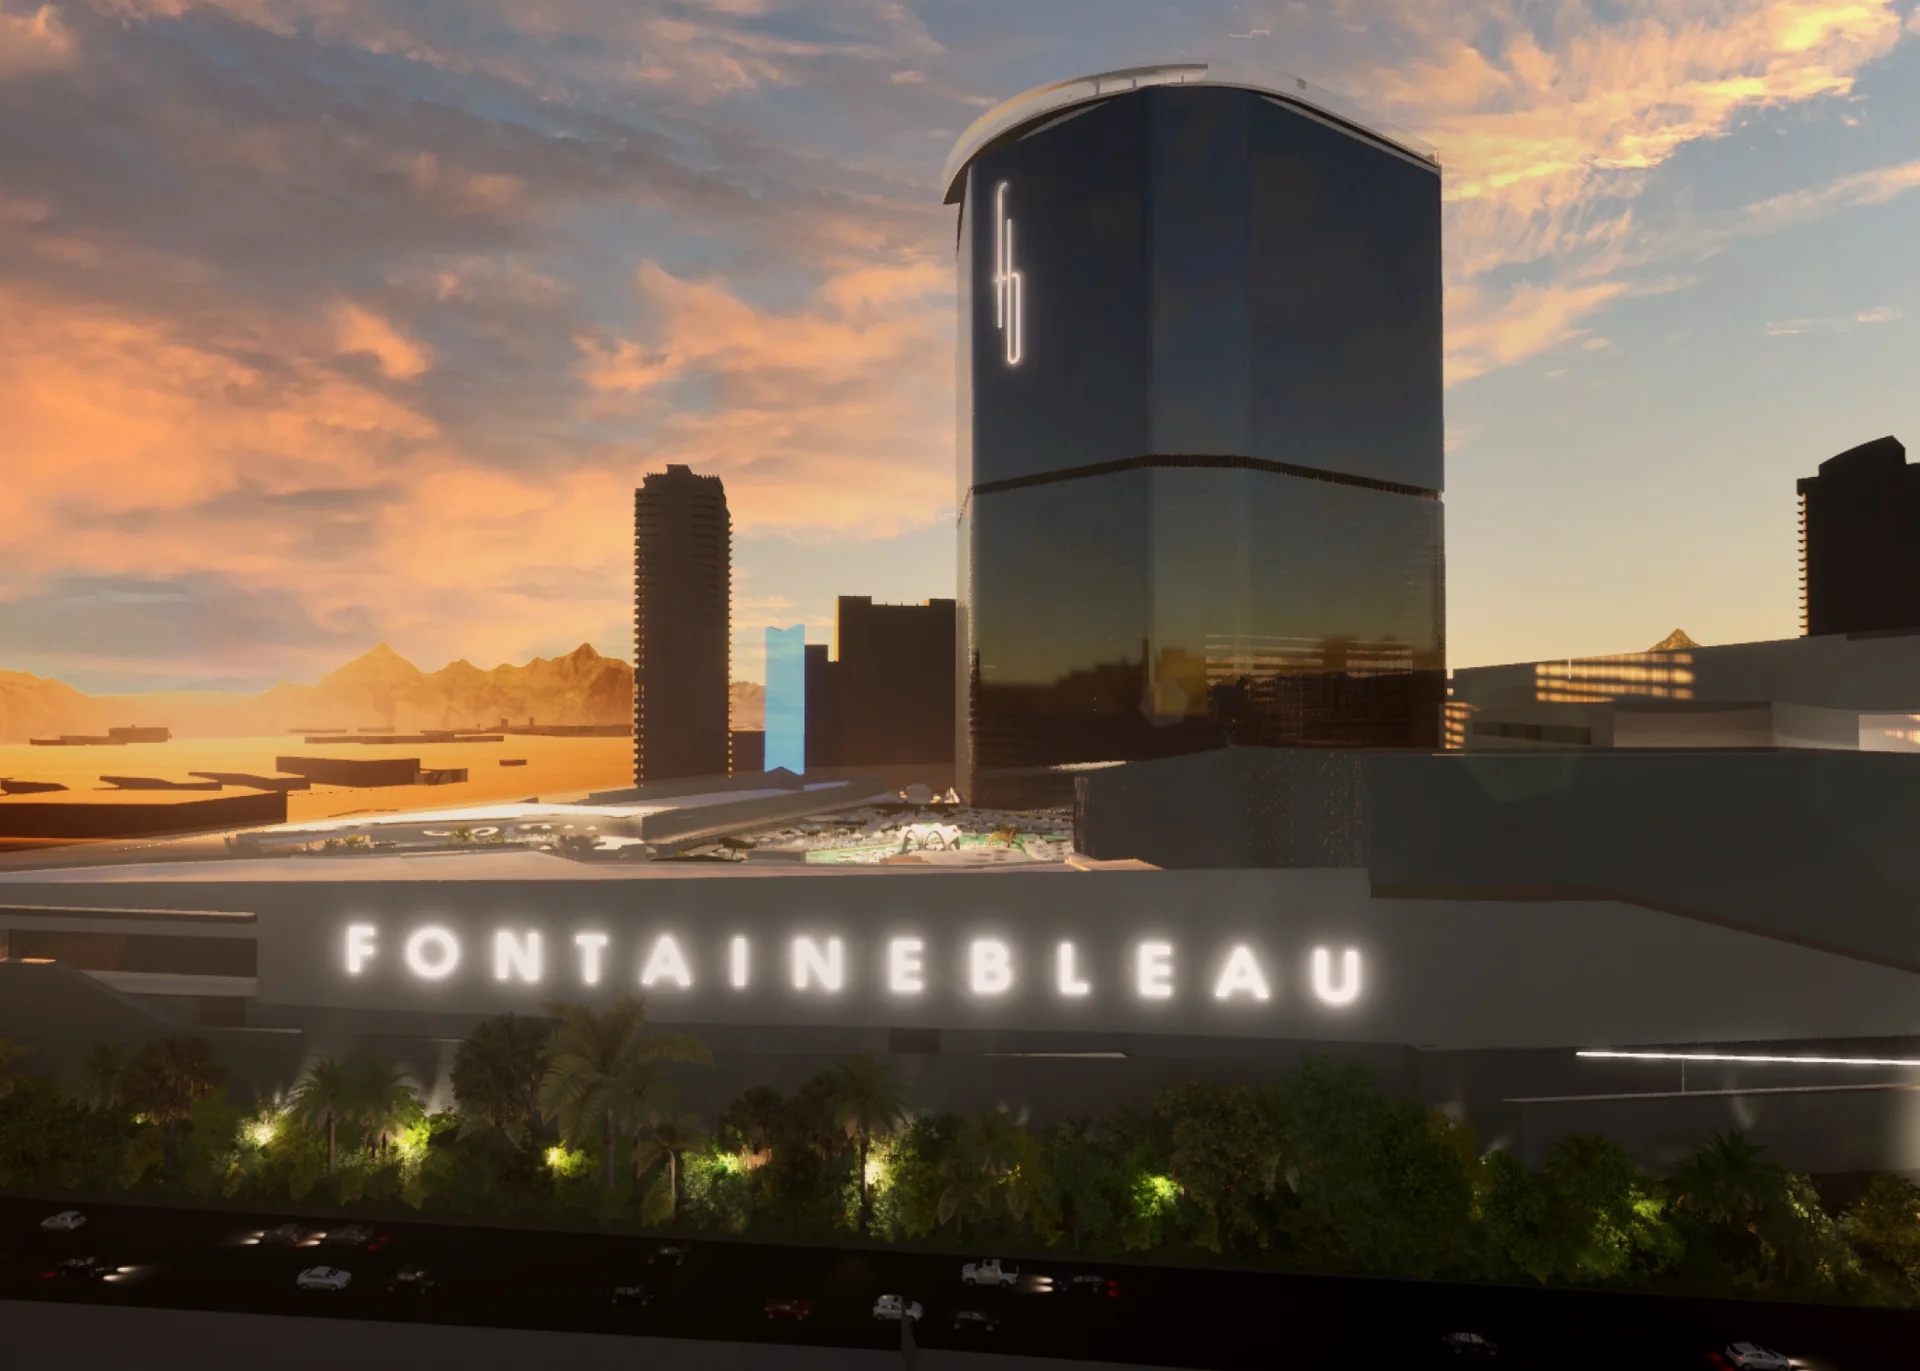 Architectural Rendering of Fontainebleau Hotel